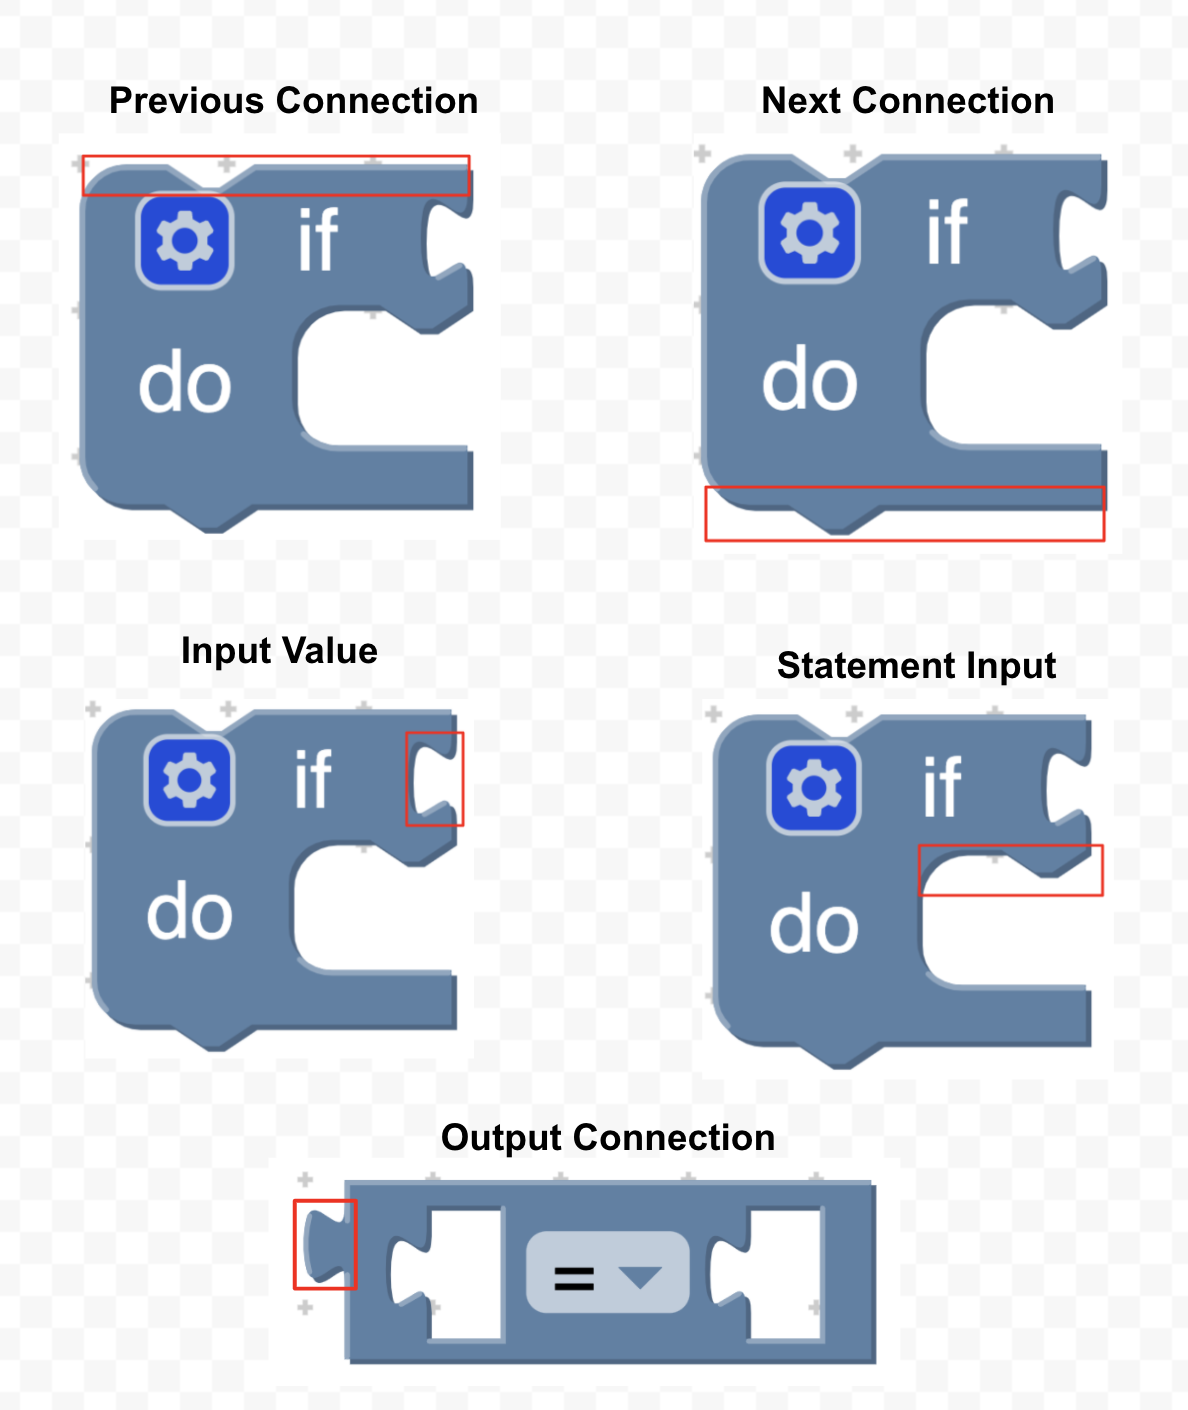 Displays the different parts of a block. The previous connection on the top of a block. The next connection on the bottom of a block. Input value as a cut out of a puzzle piece. The statement input as a connection inside of a block. The output connection as a puzzle piece.